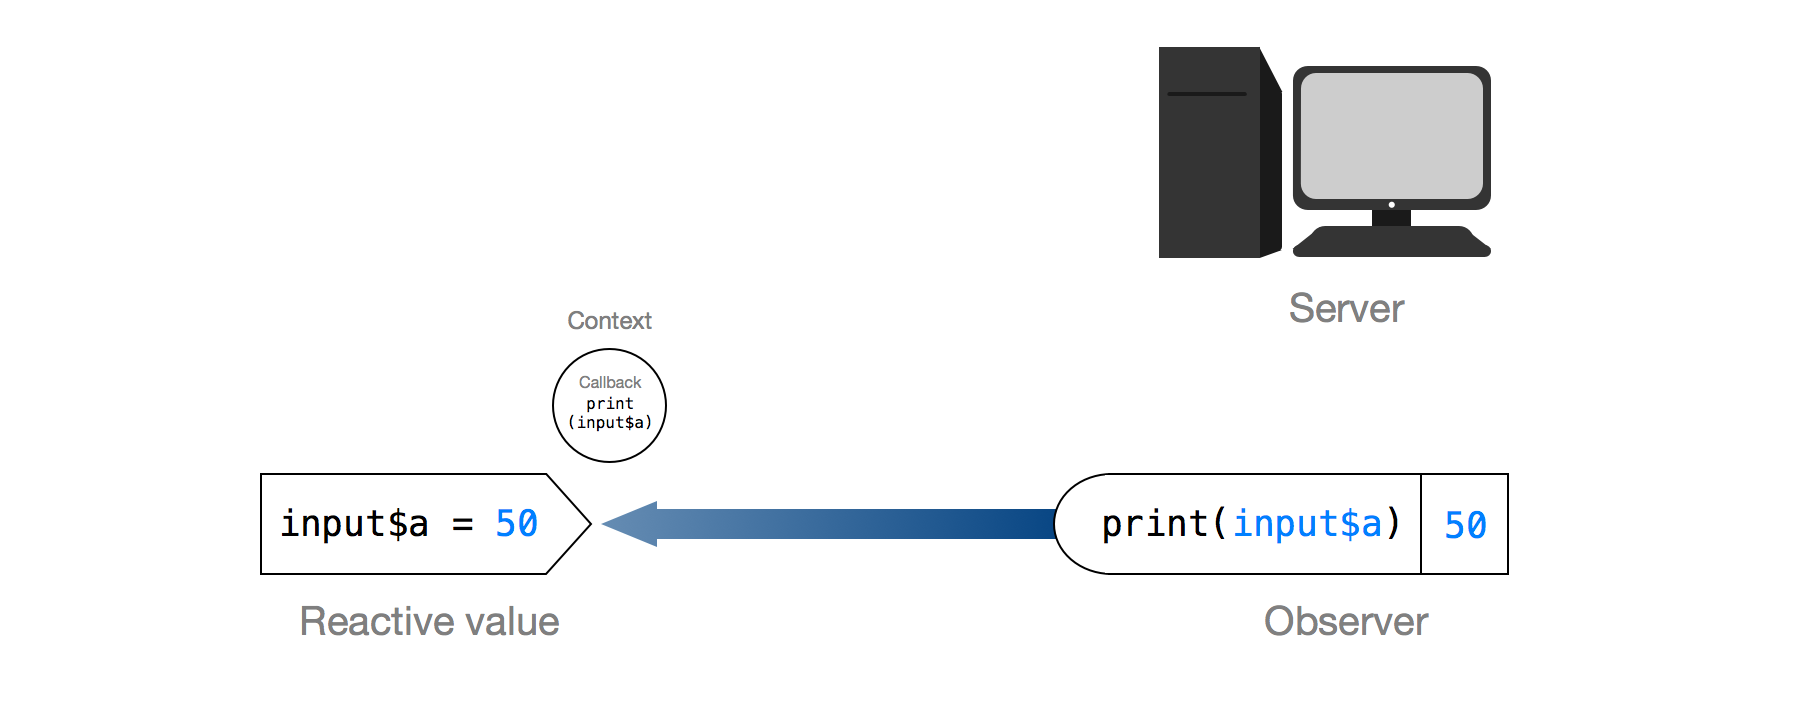 Input value input$a = 50. Output value print(input$a) 50 next to image of a server. Arrow goes from output, labeled Observer, to input labeled Reactive value. Context includes callback, print(input$a)